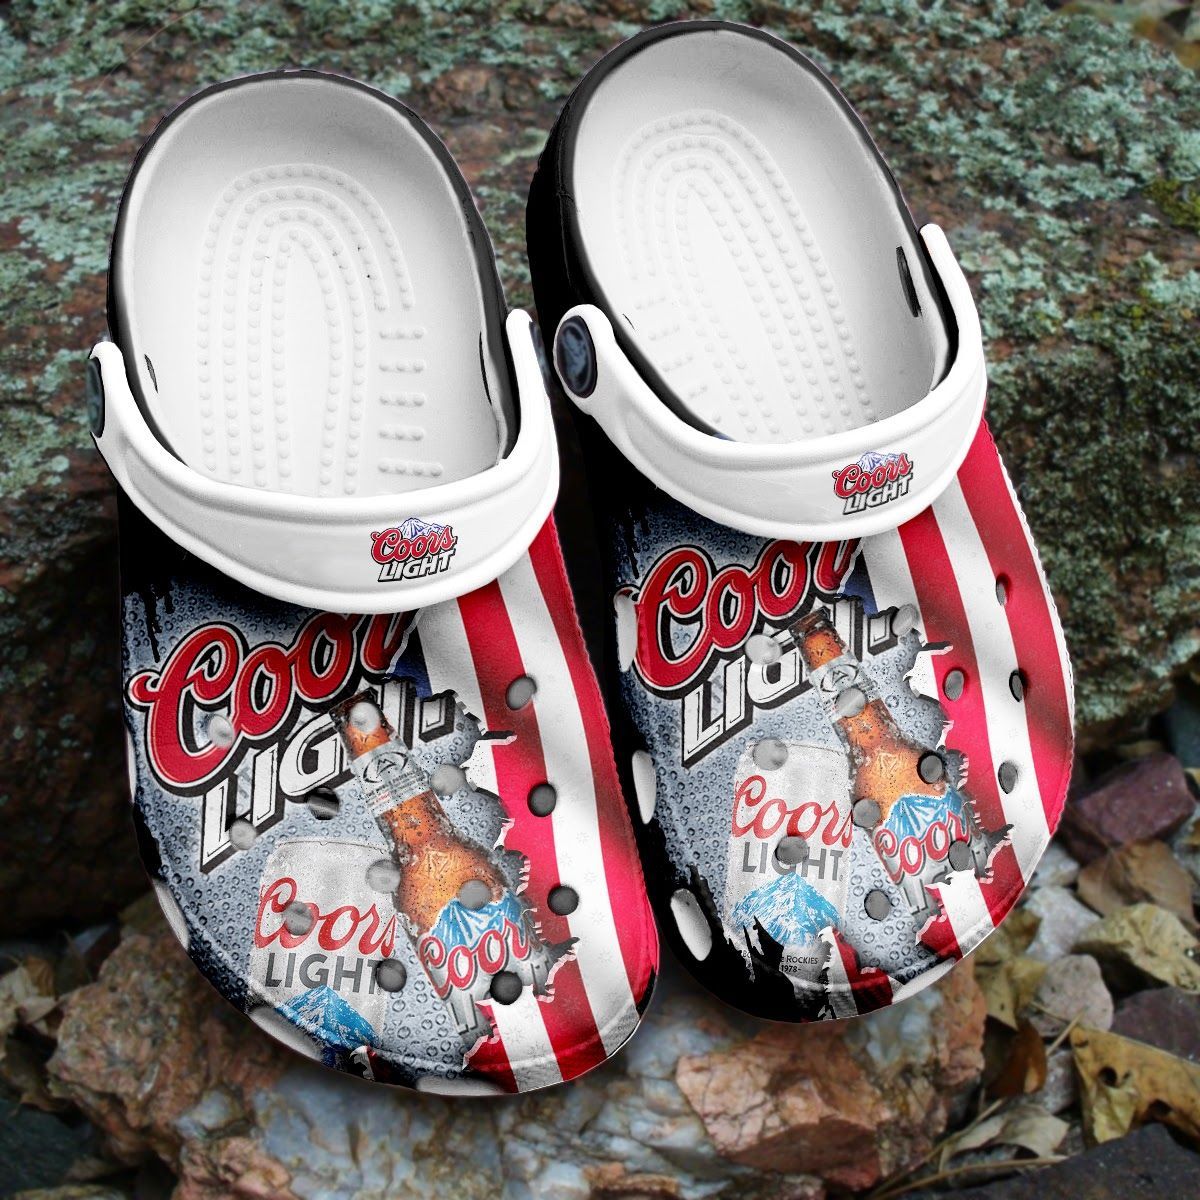 If you'd like to purchase a pair of Crocband Clogs, be sure to check out the official website. 127